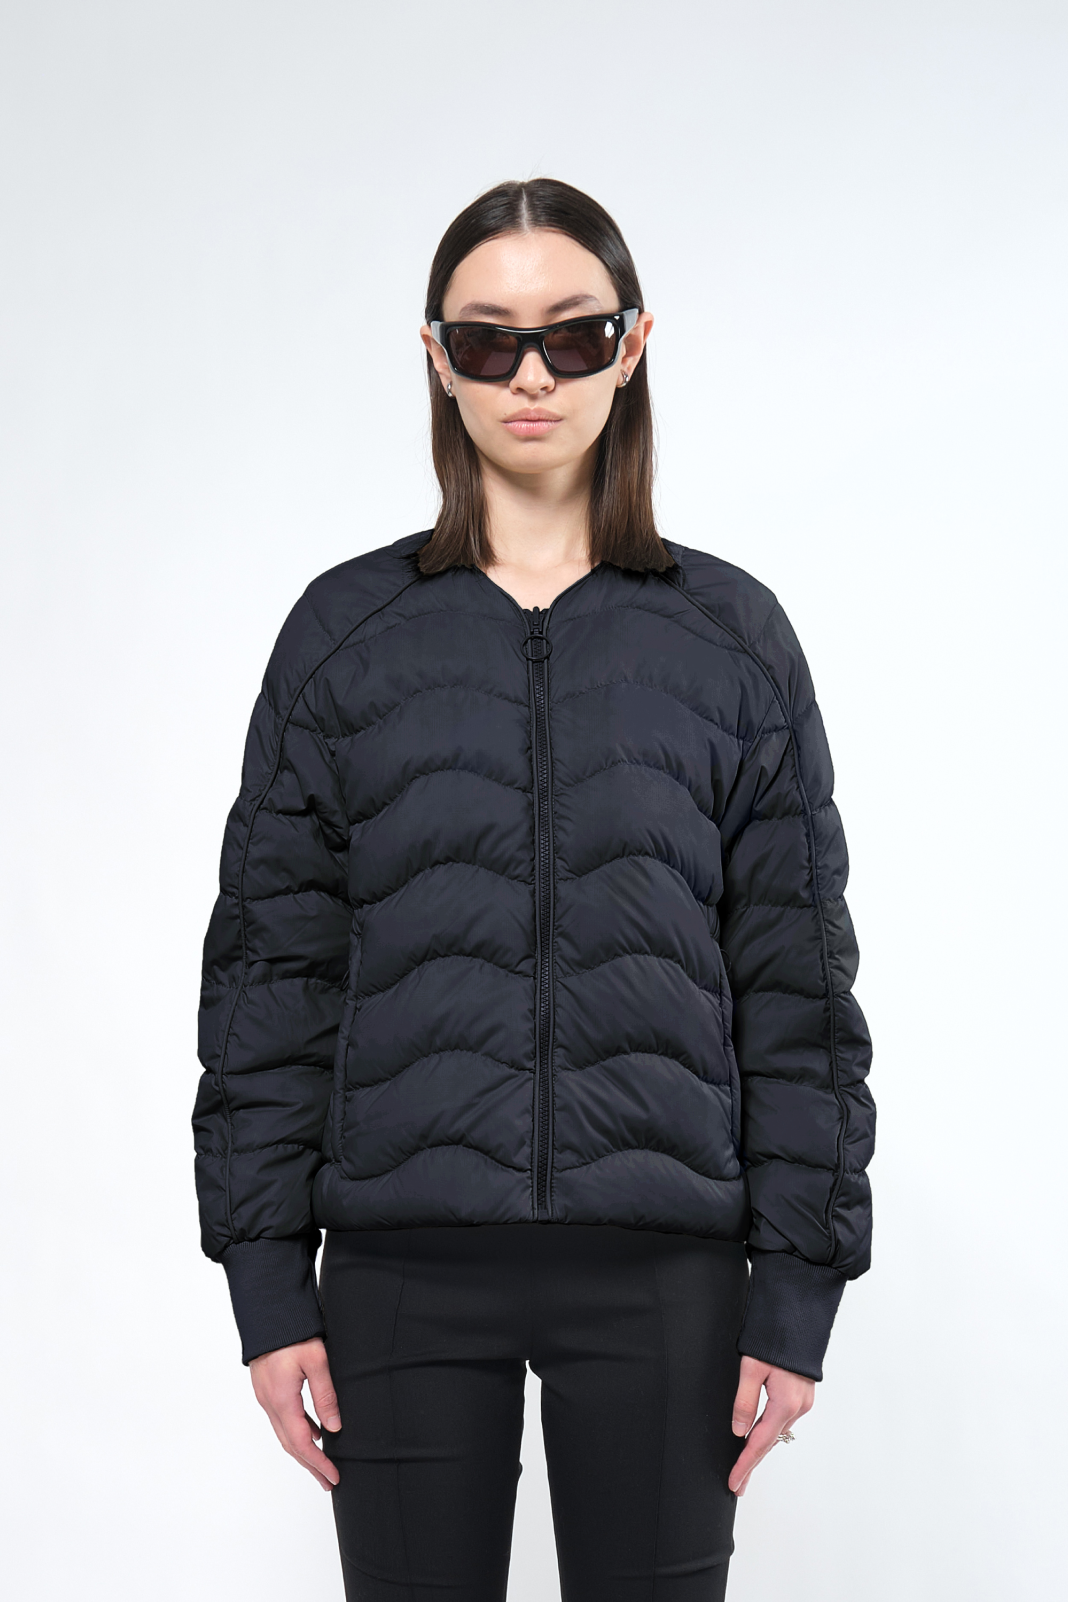  Re:Down® Black Light Puffer Jacket - Adhere To  - 3